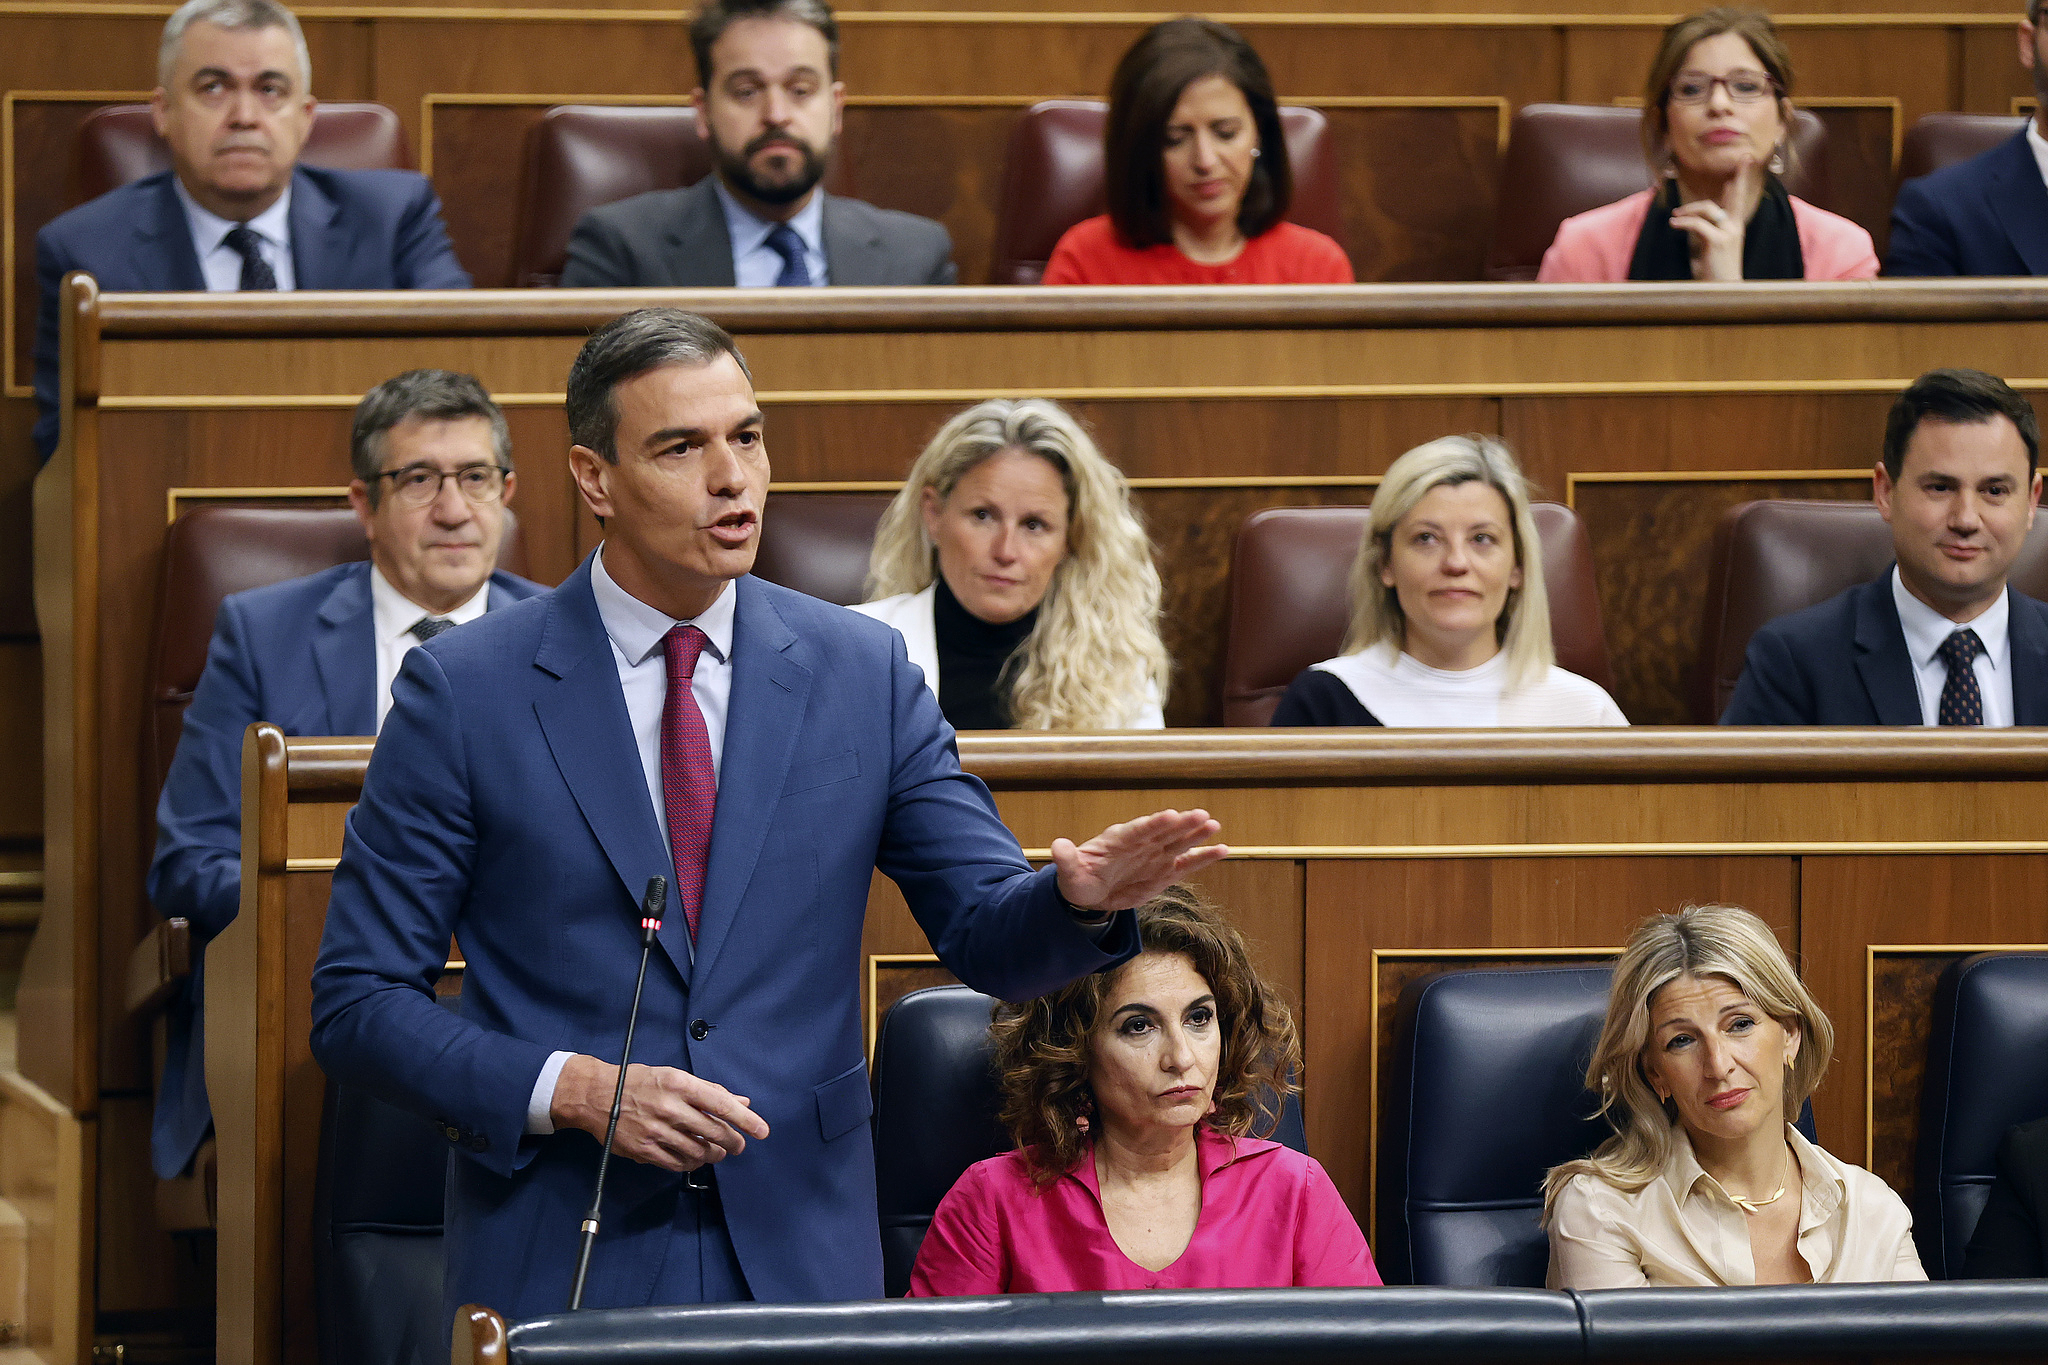 Sánchez cancels his agenda and considers resigning: "I need to stop and reflect"